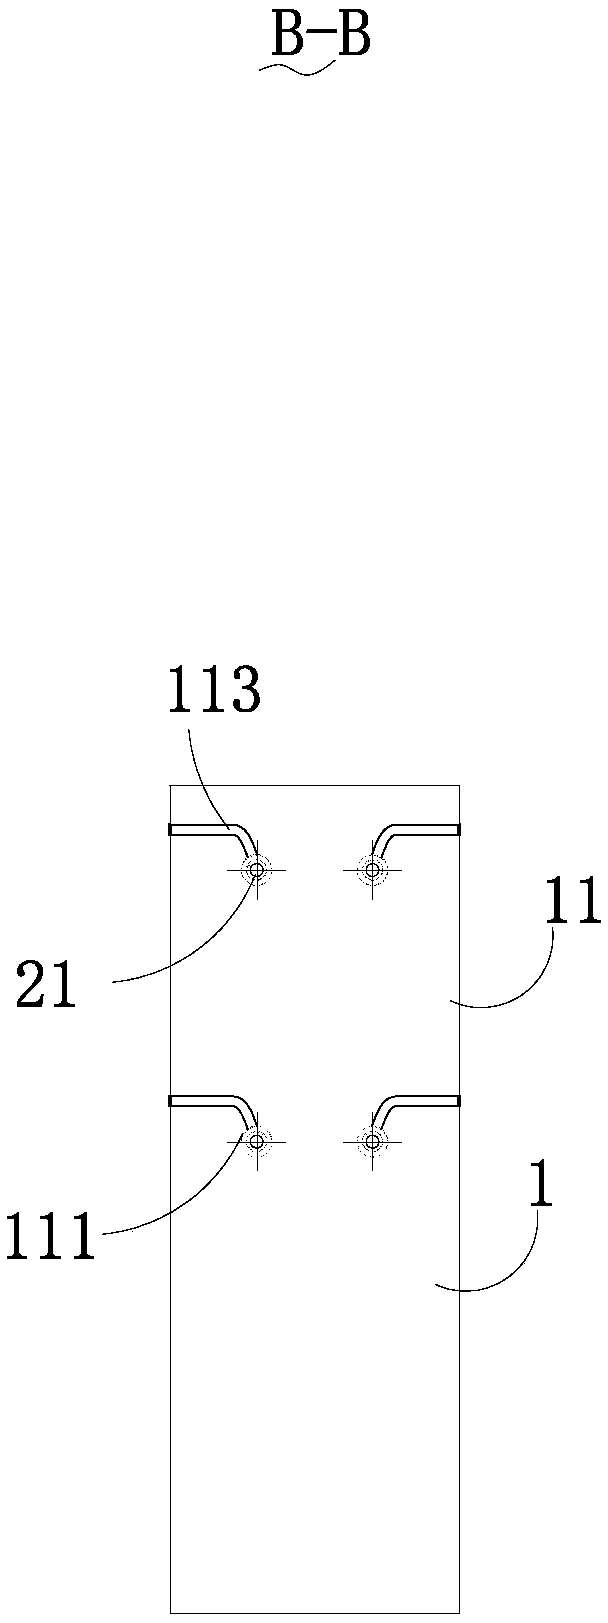 Connecting joint of prefabricated beam and columns